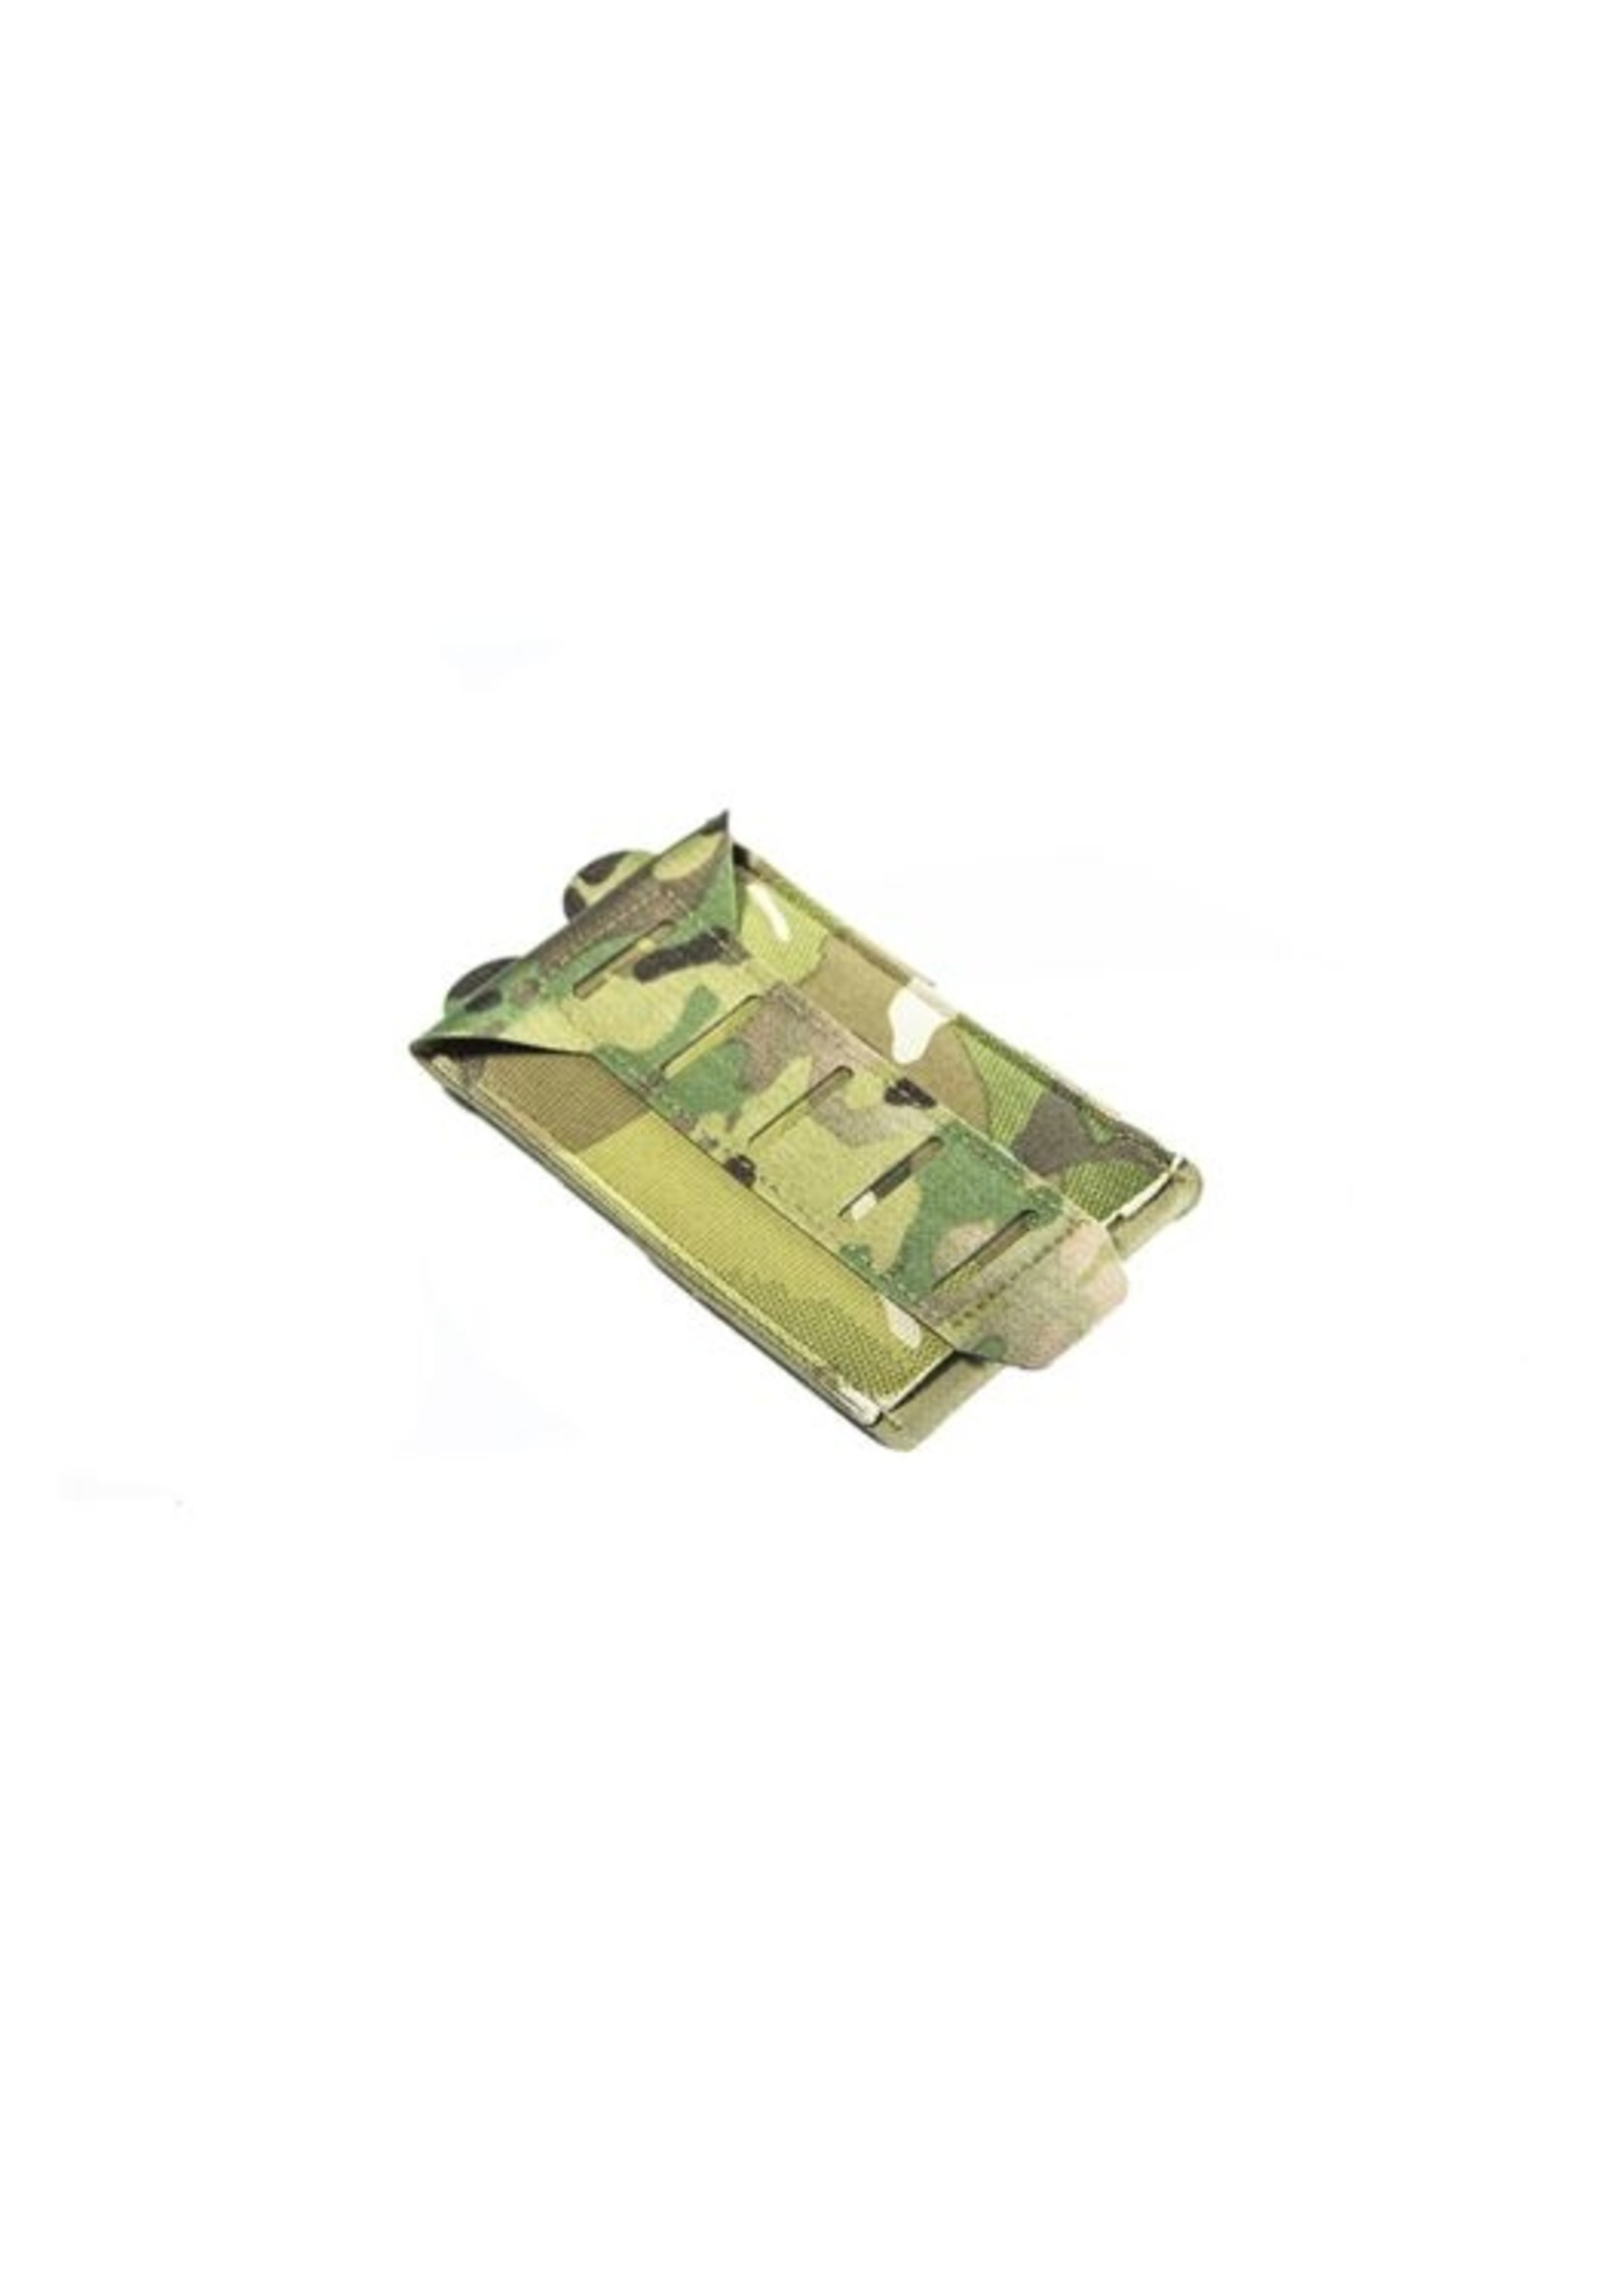 BLUE FORCE GEAR STACKABLE TEN-SPEED SINGLE  M4 MAG POUCH